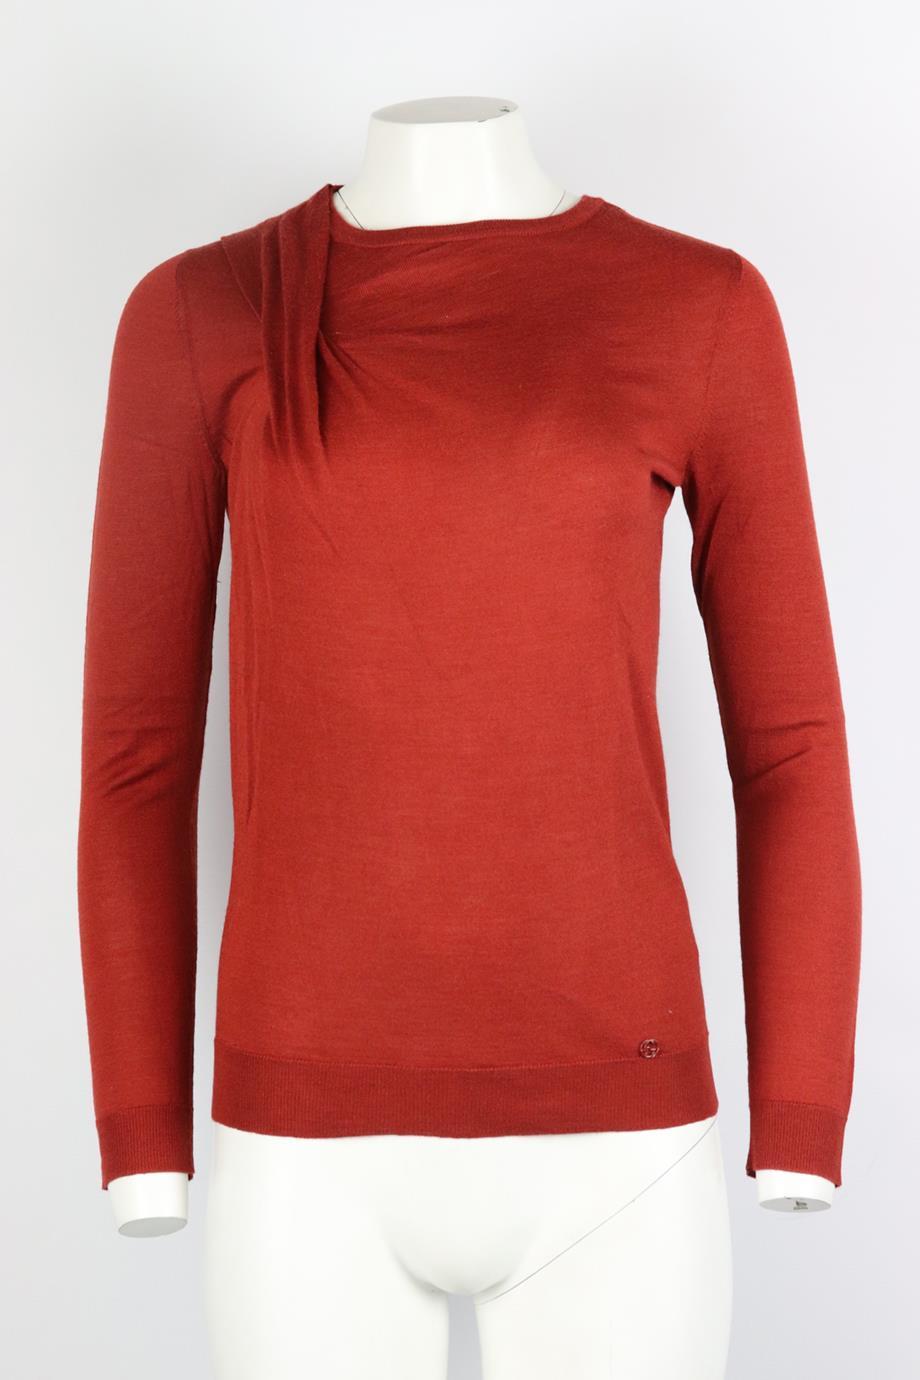 Gucci cashmere and wool blend sweater. Red. Long sleeve, crewneck. Slips on. Size: Medium (UK 10, US 6, FR 38, IT 42). Bust: 33.6 in. Waist: 30.2 in. Hips: 30.4 in. Length: 24.7 in. Very good condition - Composition label cut out for comfort; see